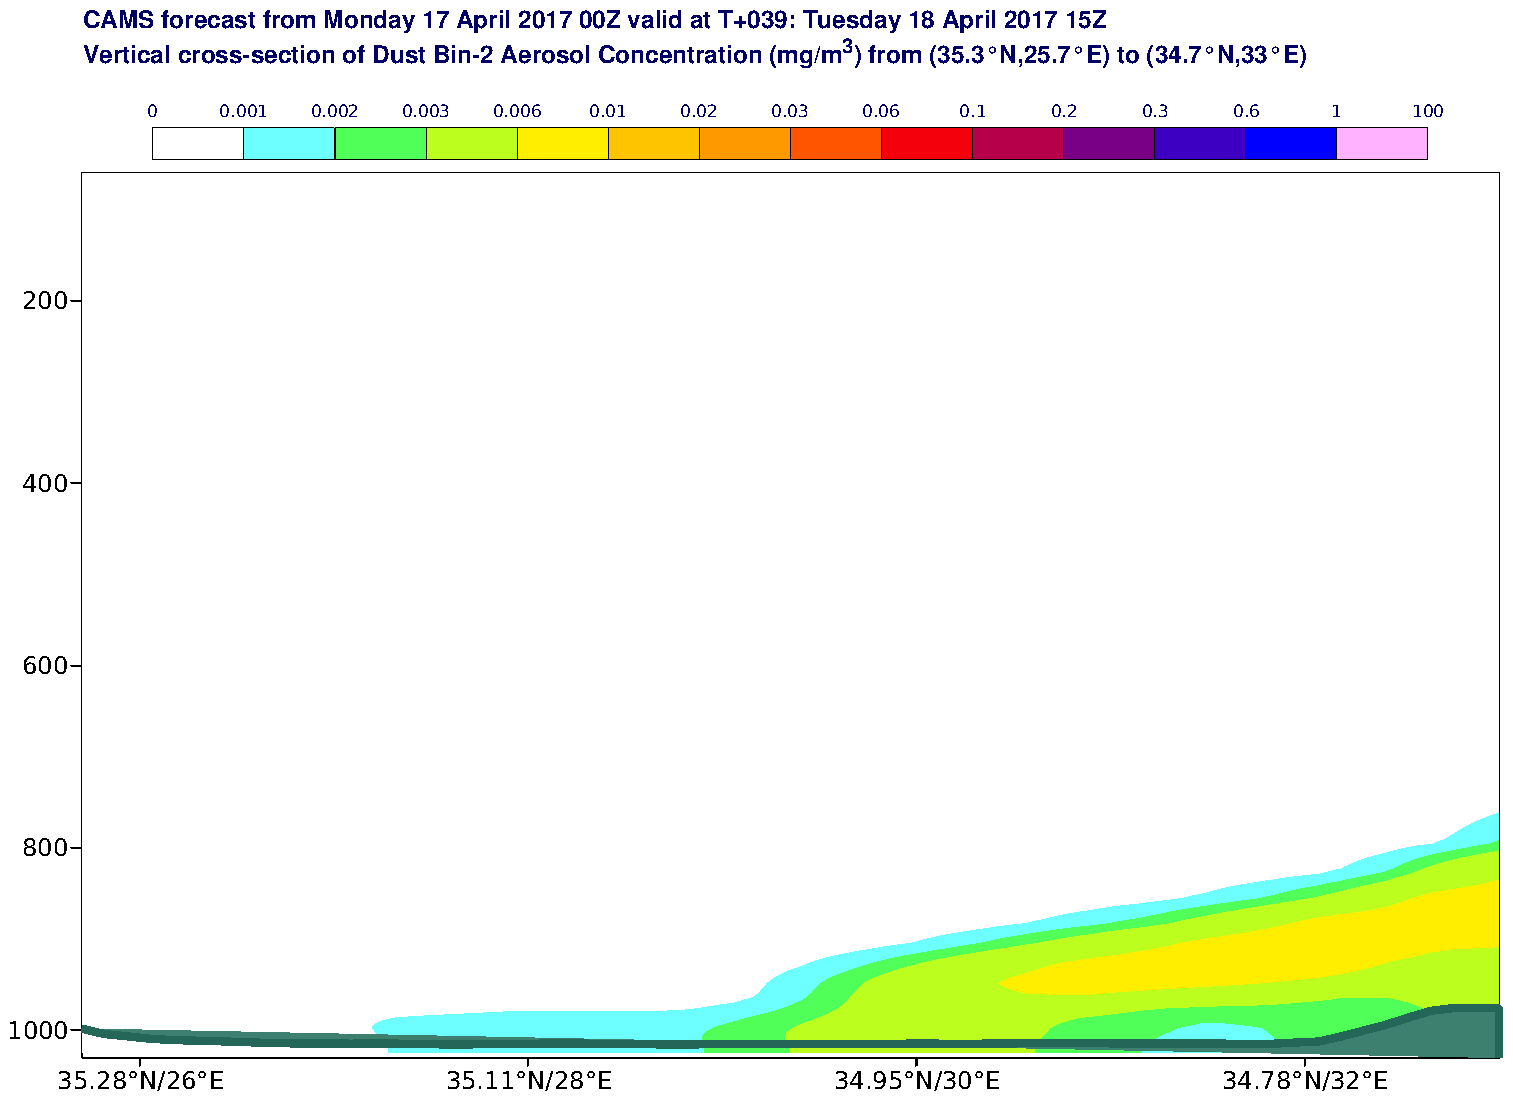 Vertical cross-section of Dust Bin-2 Aerosol Concentration (mg/m3) valid at T39 - 2017-04-18 15:00